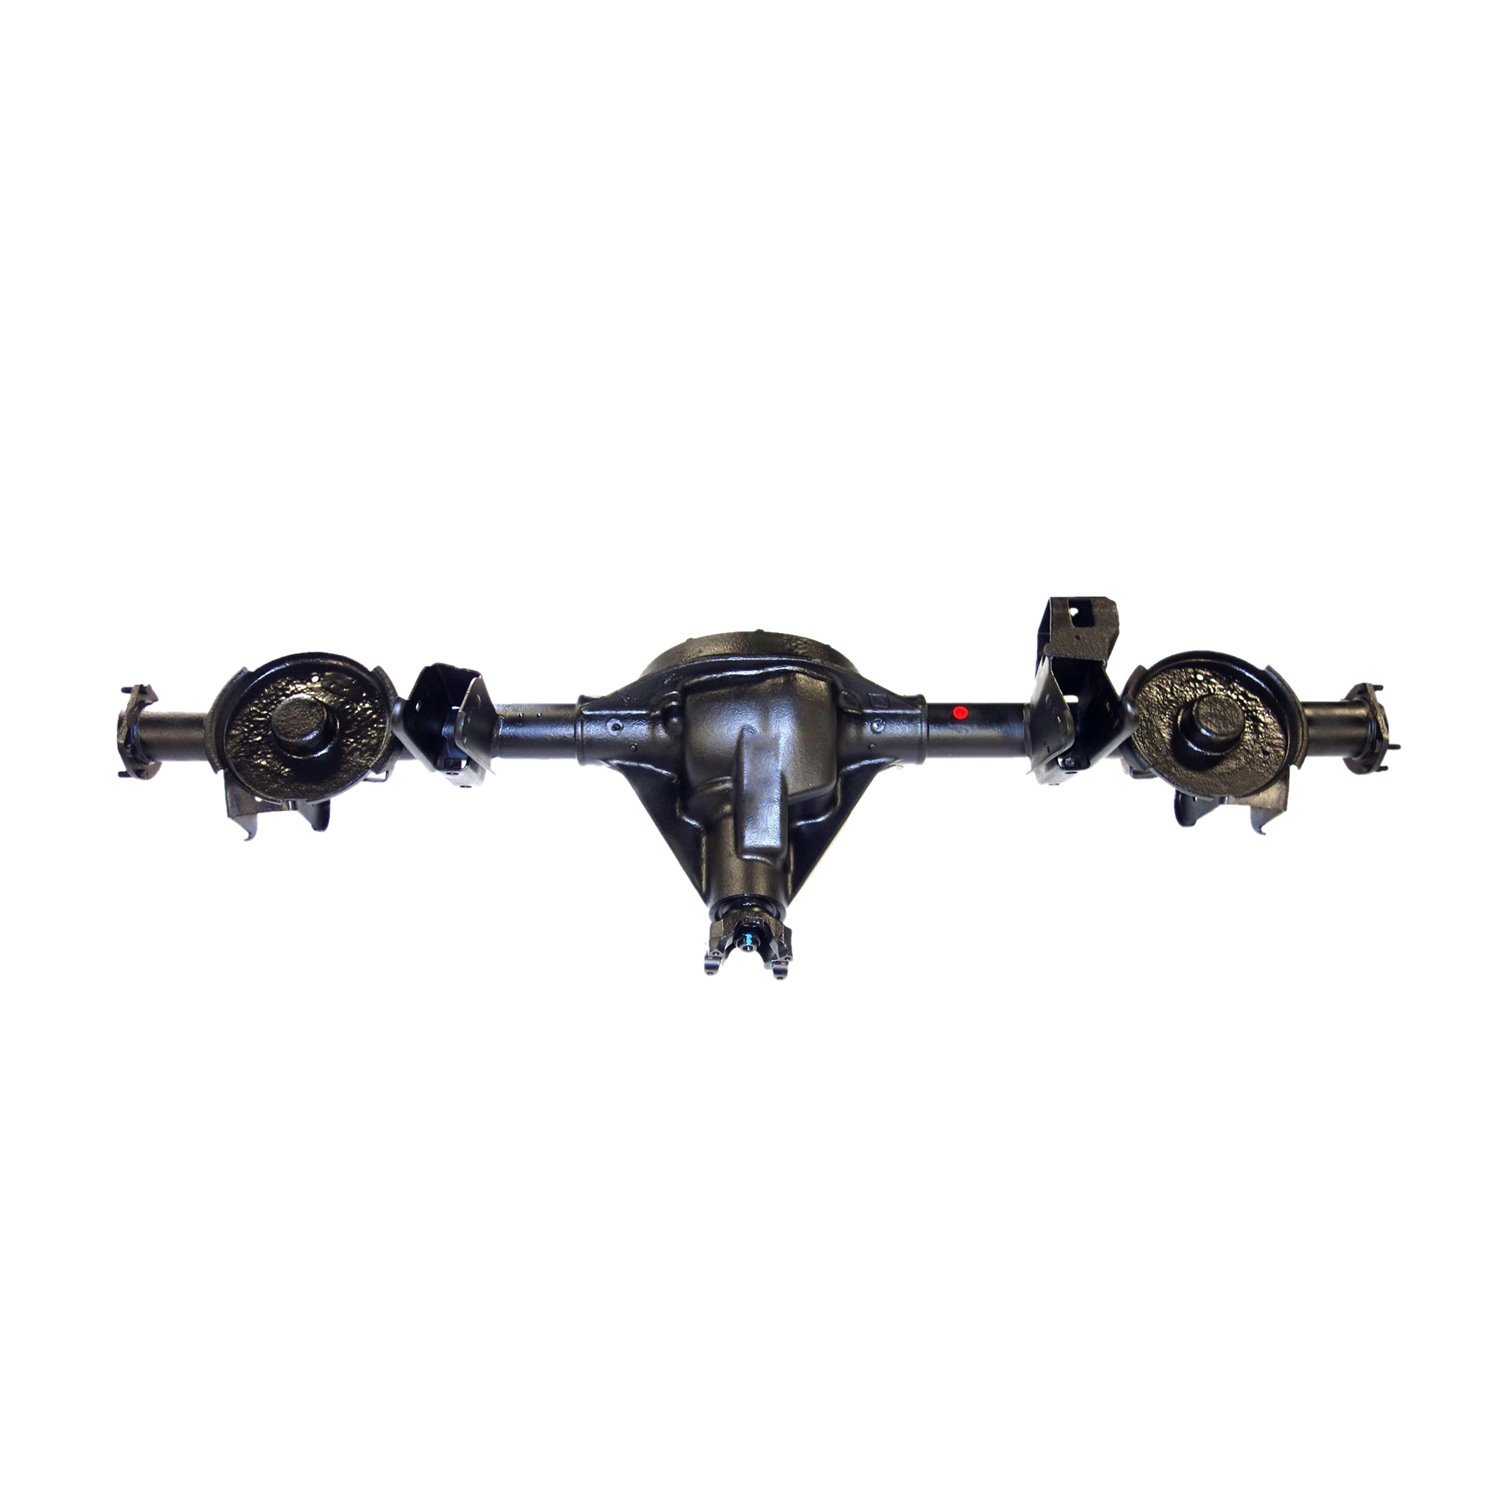 Remanufactured Complete Axle Assembly for Dana 35 93-95 Wrangler 3.07 with ABS, Posi LSD